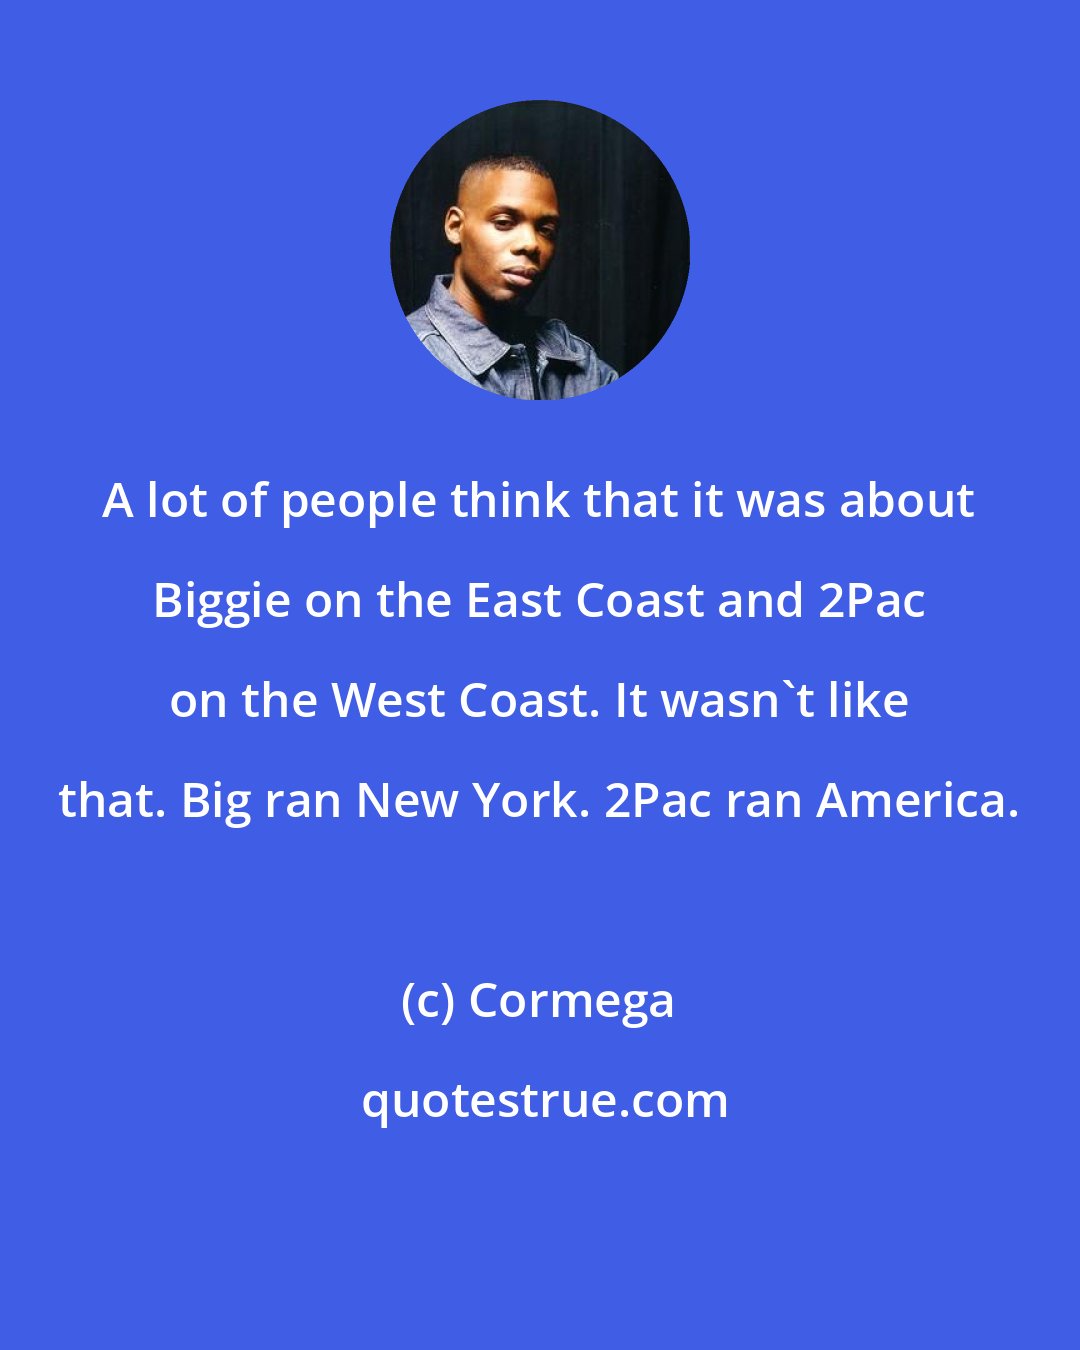 Cormega: A lot of people think that it was about Biggie on the East Coast and 2Pac on the West Coast. It wasn't like that. Big ran New York. 2Pac ran America.